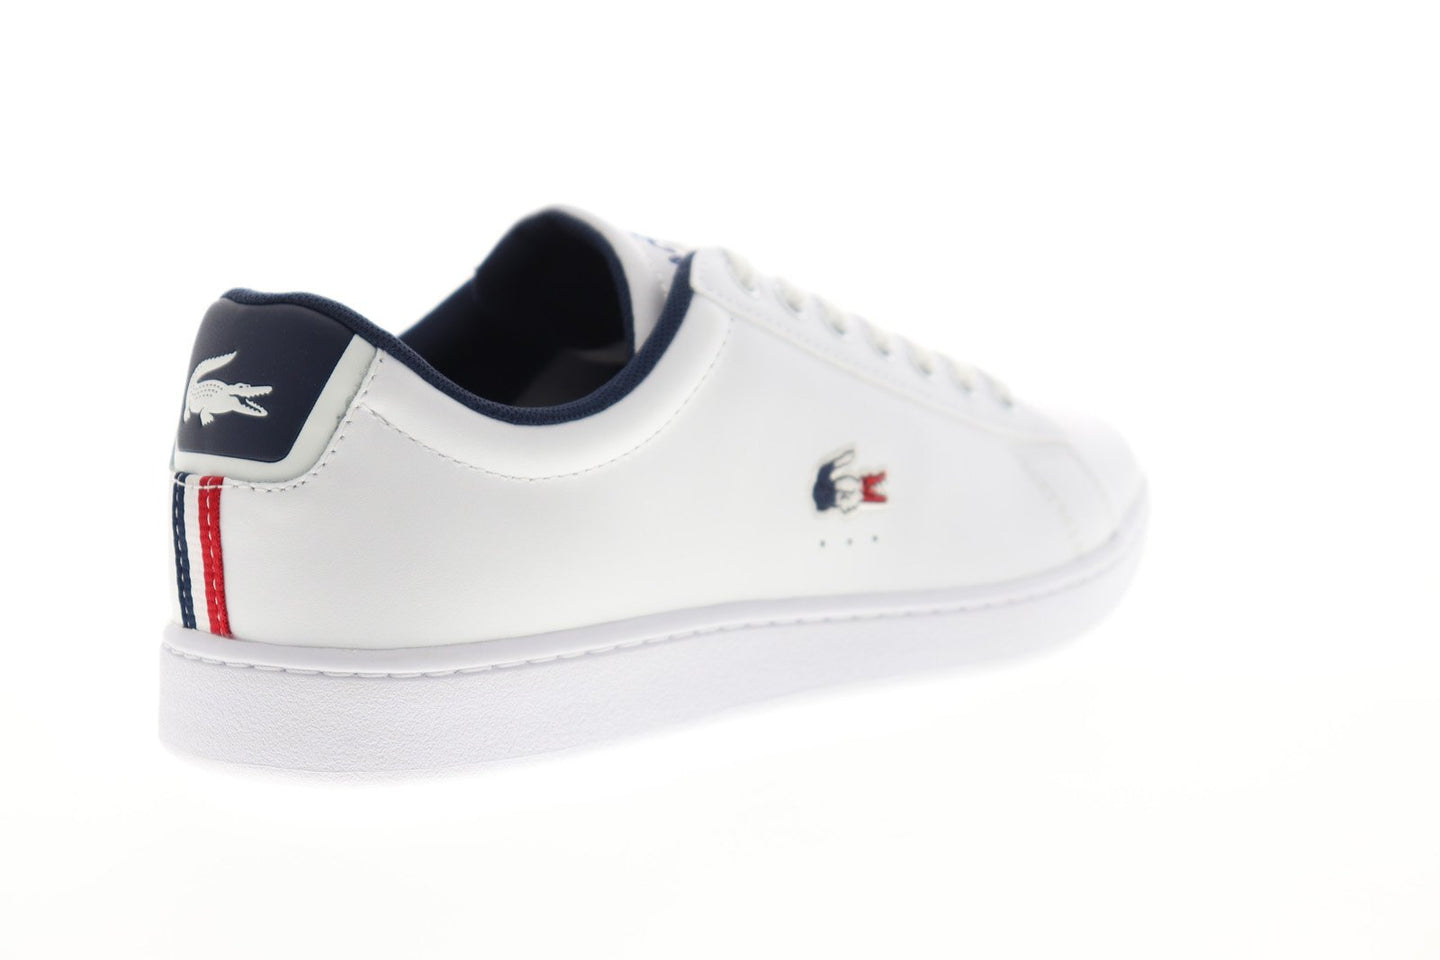 Lacoste Carnaby Evo Tri 1 SMA Mens White Leather Lifestyle Sneakers Sh ...